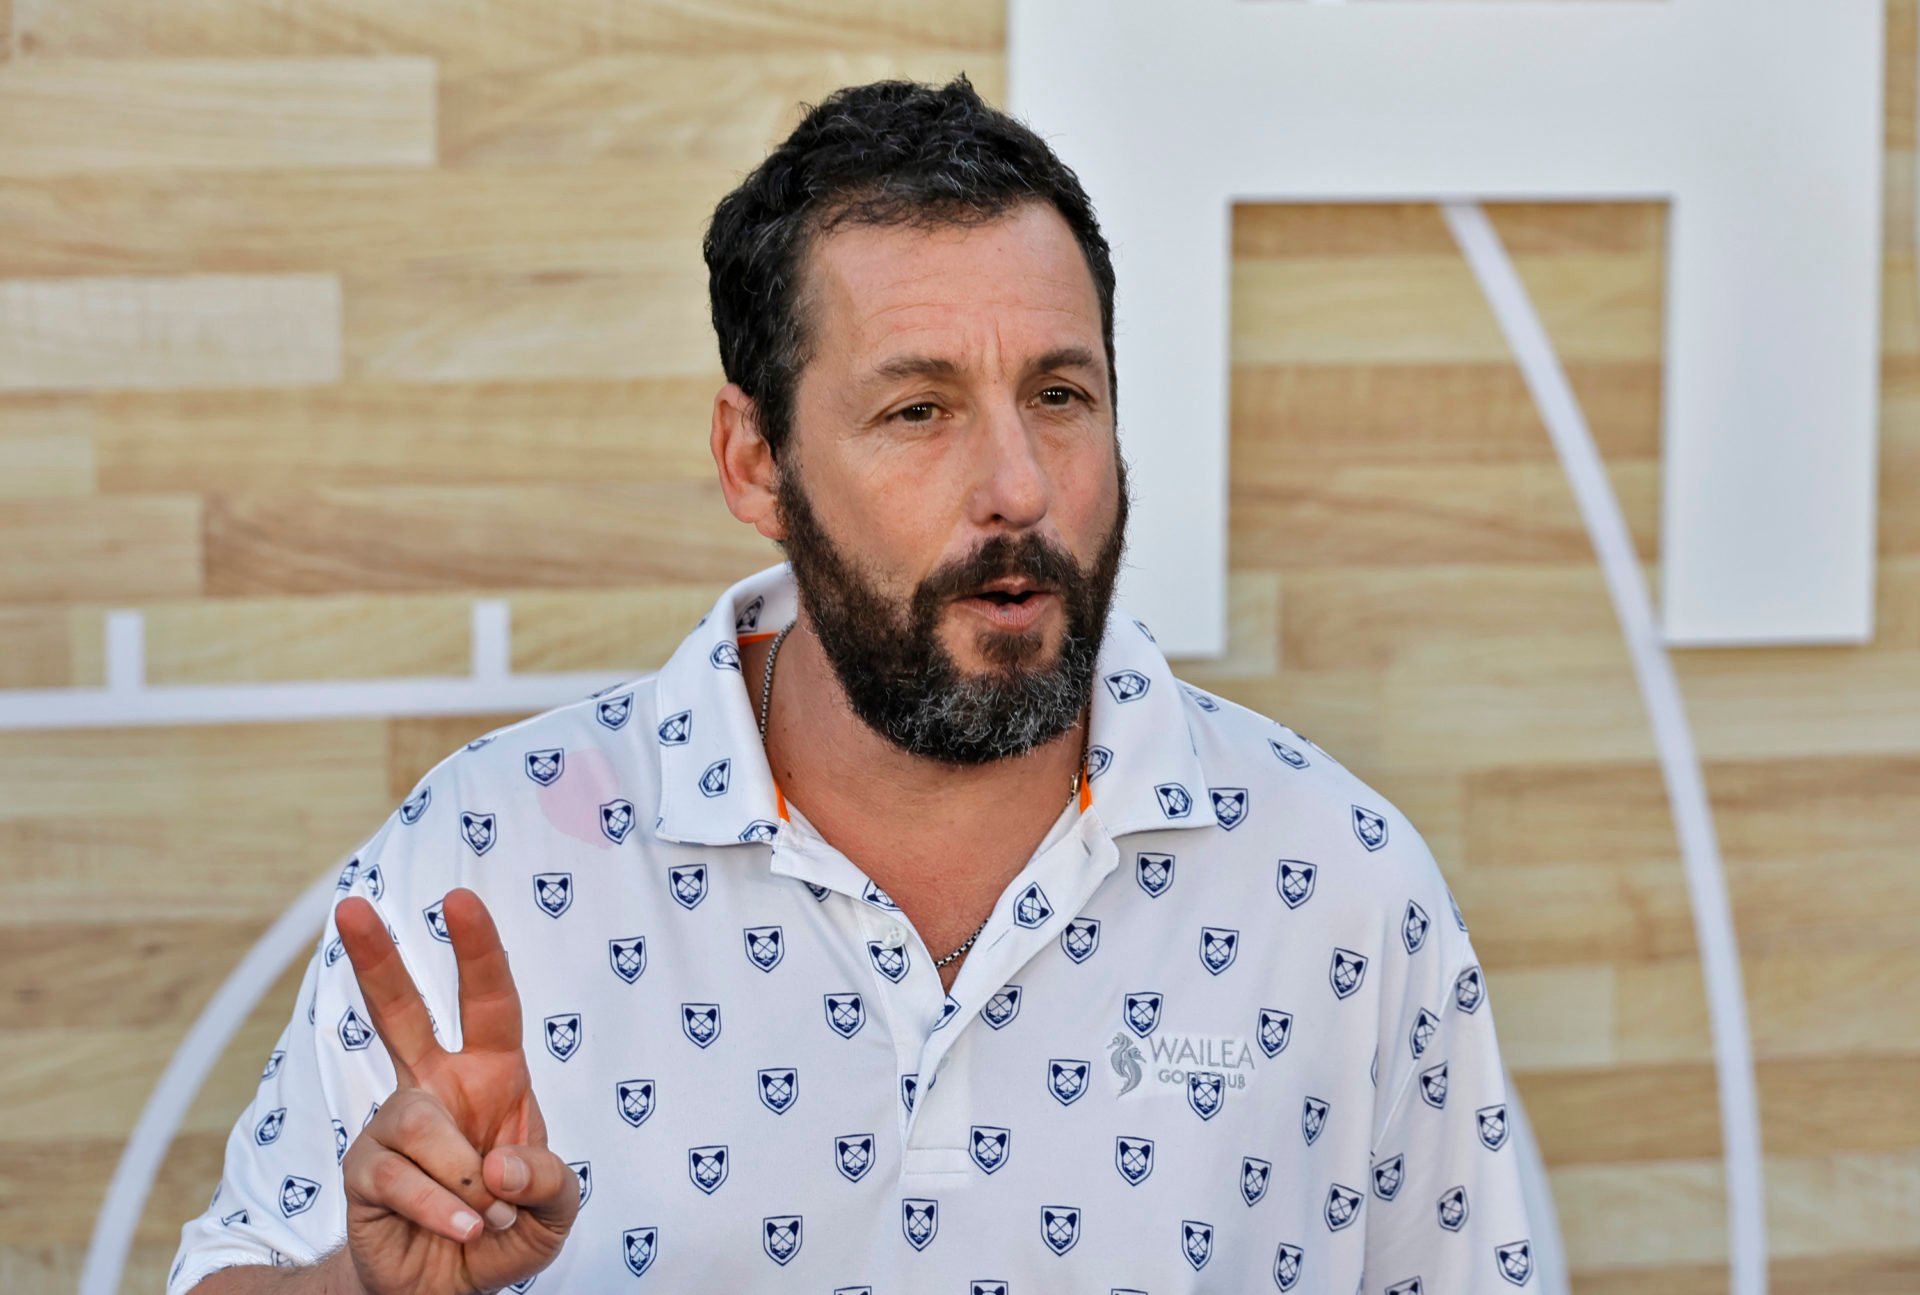 How to access presale codes for Adam Sandler's 2022 tour across the US